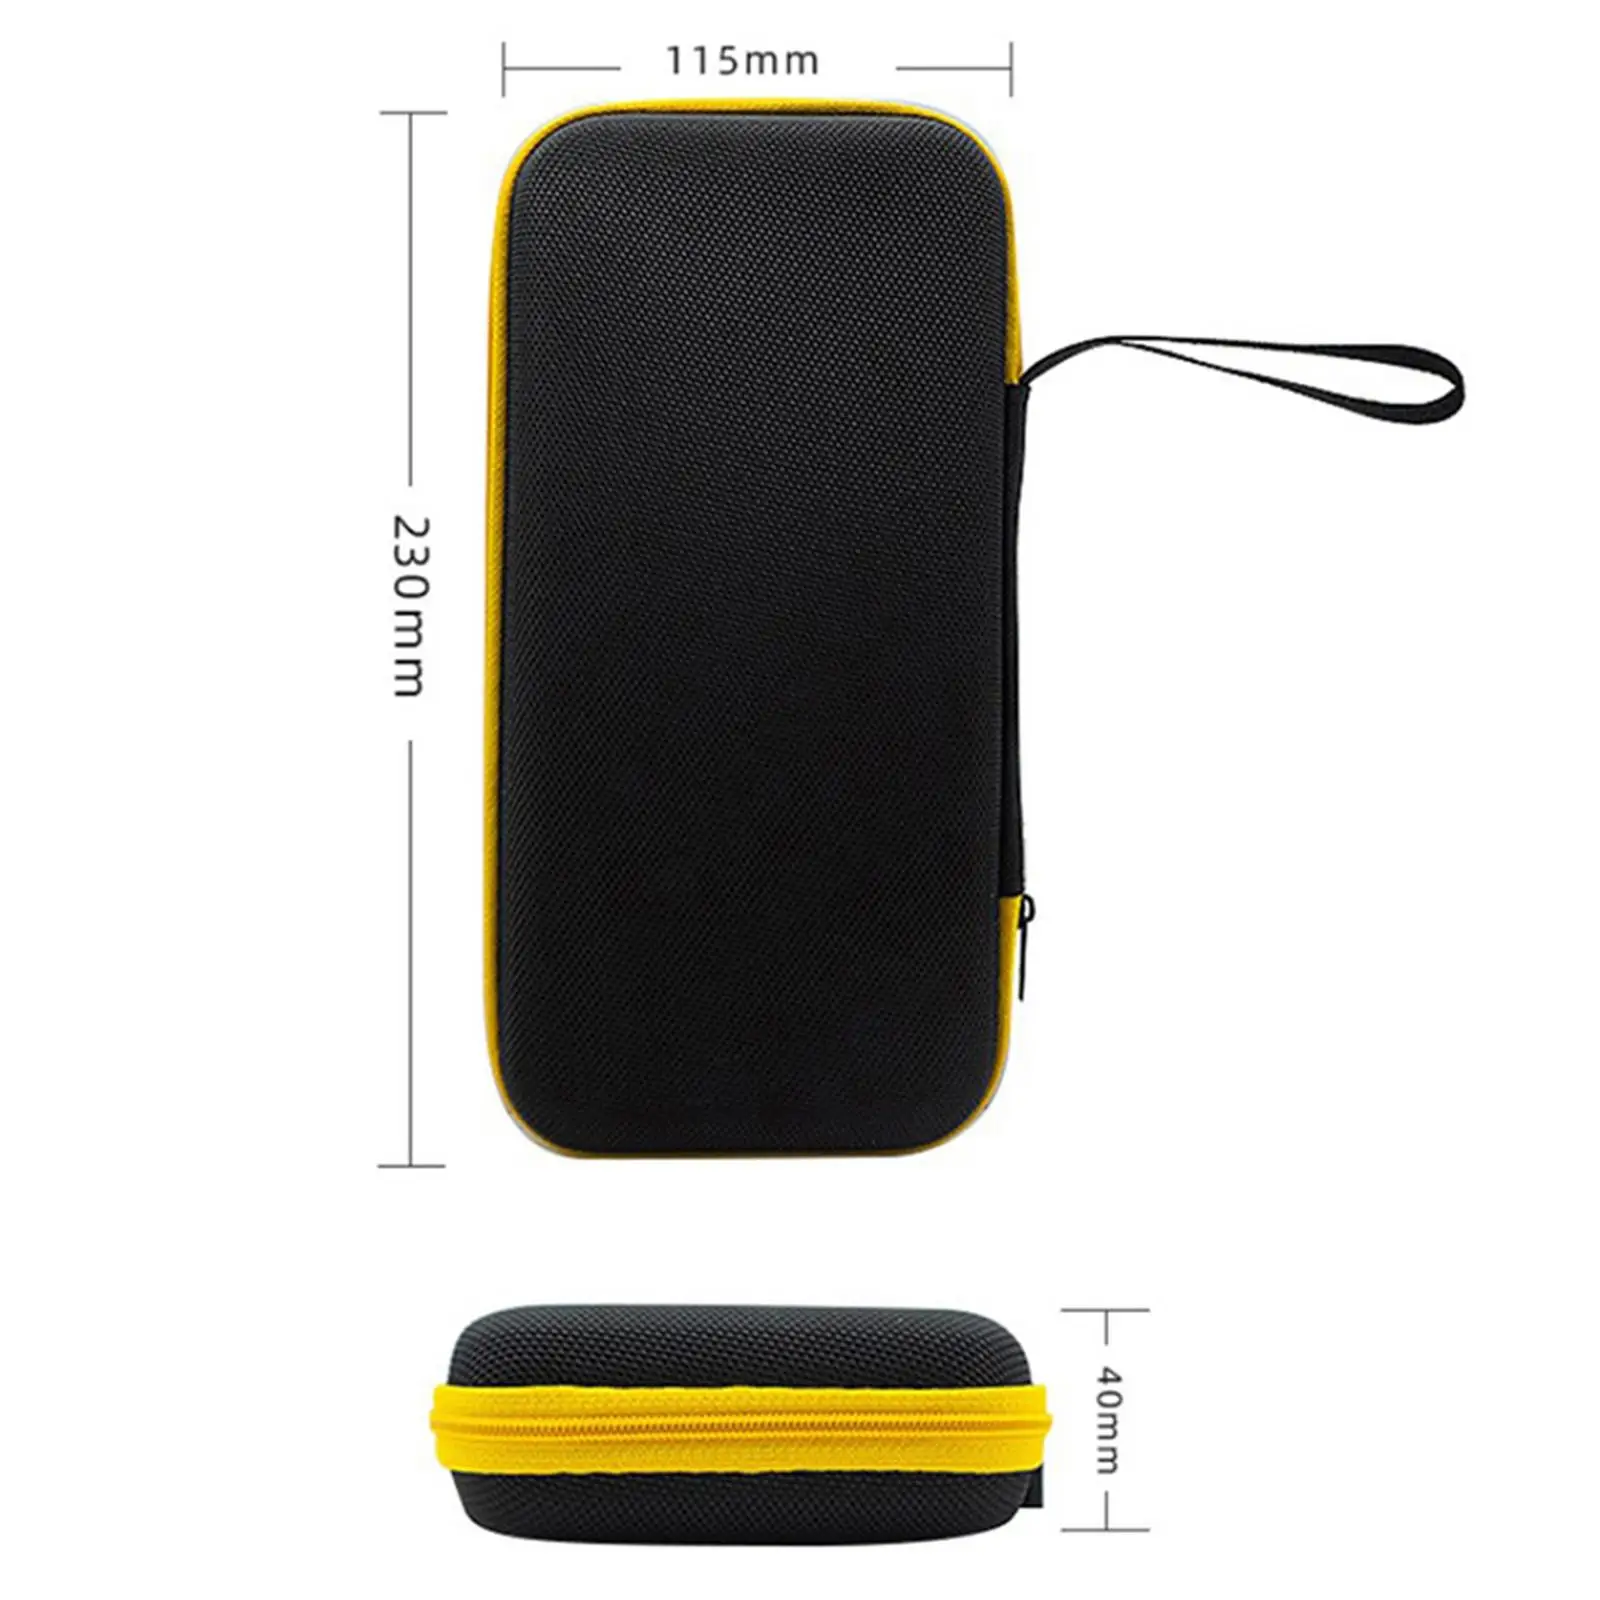 Carrying Case Suitcase Bag Hard Protective Impact Resistant Black Accessory Portable Hard Shell Pouch for Pocket 3 Game Console